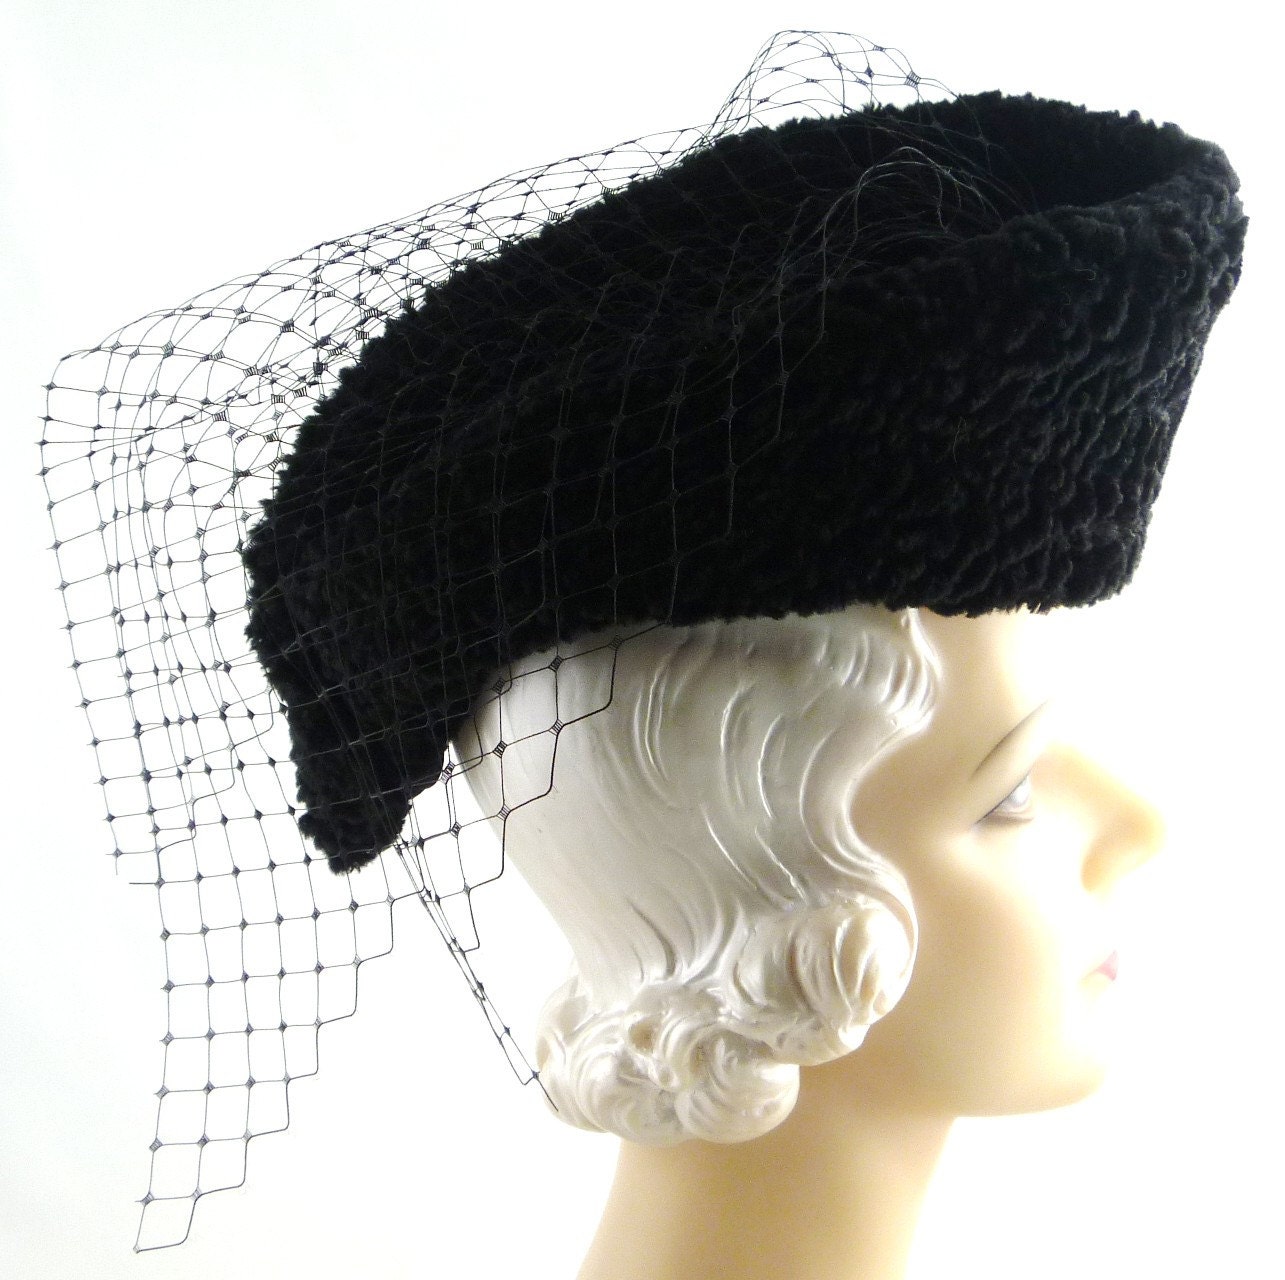 Reproduction Gypsy Rose Lee Black Boucle Curve Hat and Veil 1930s Hat - HatArtists